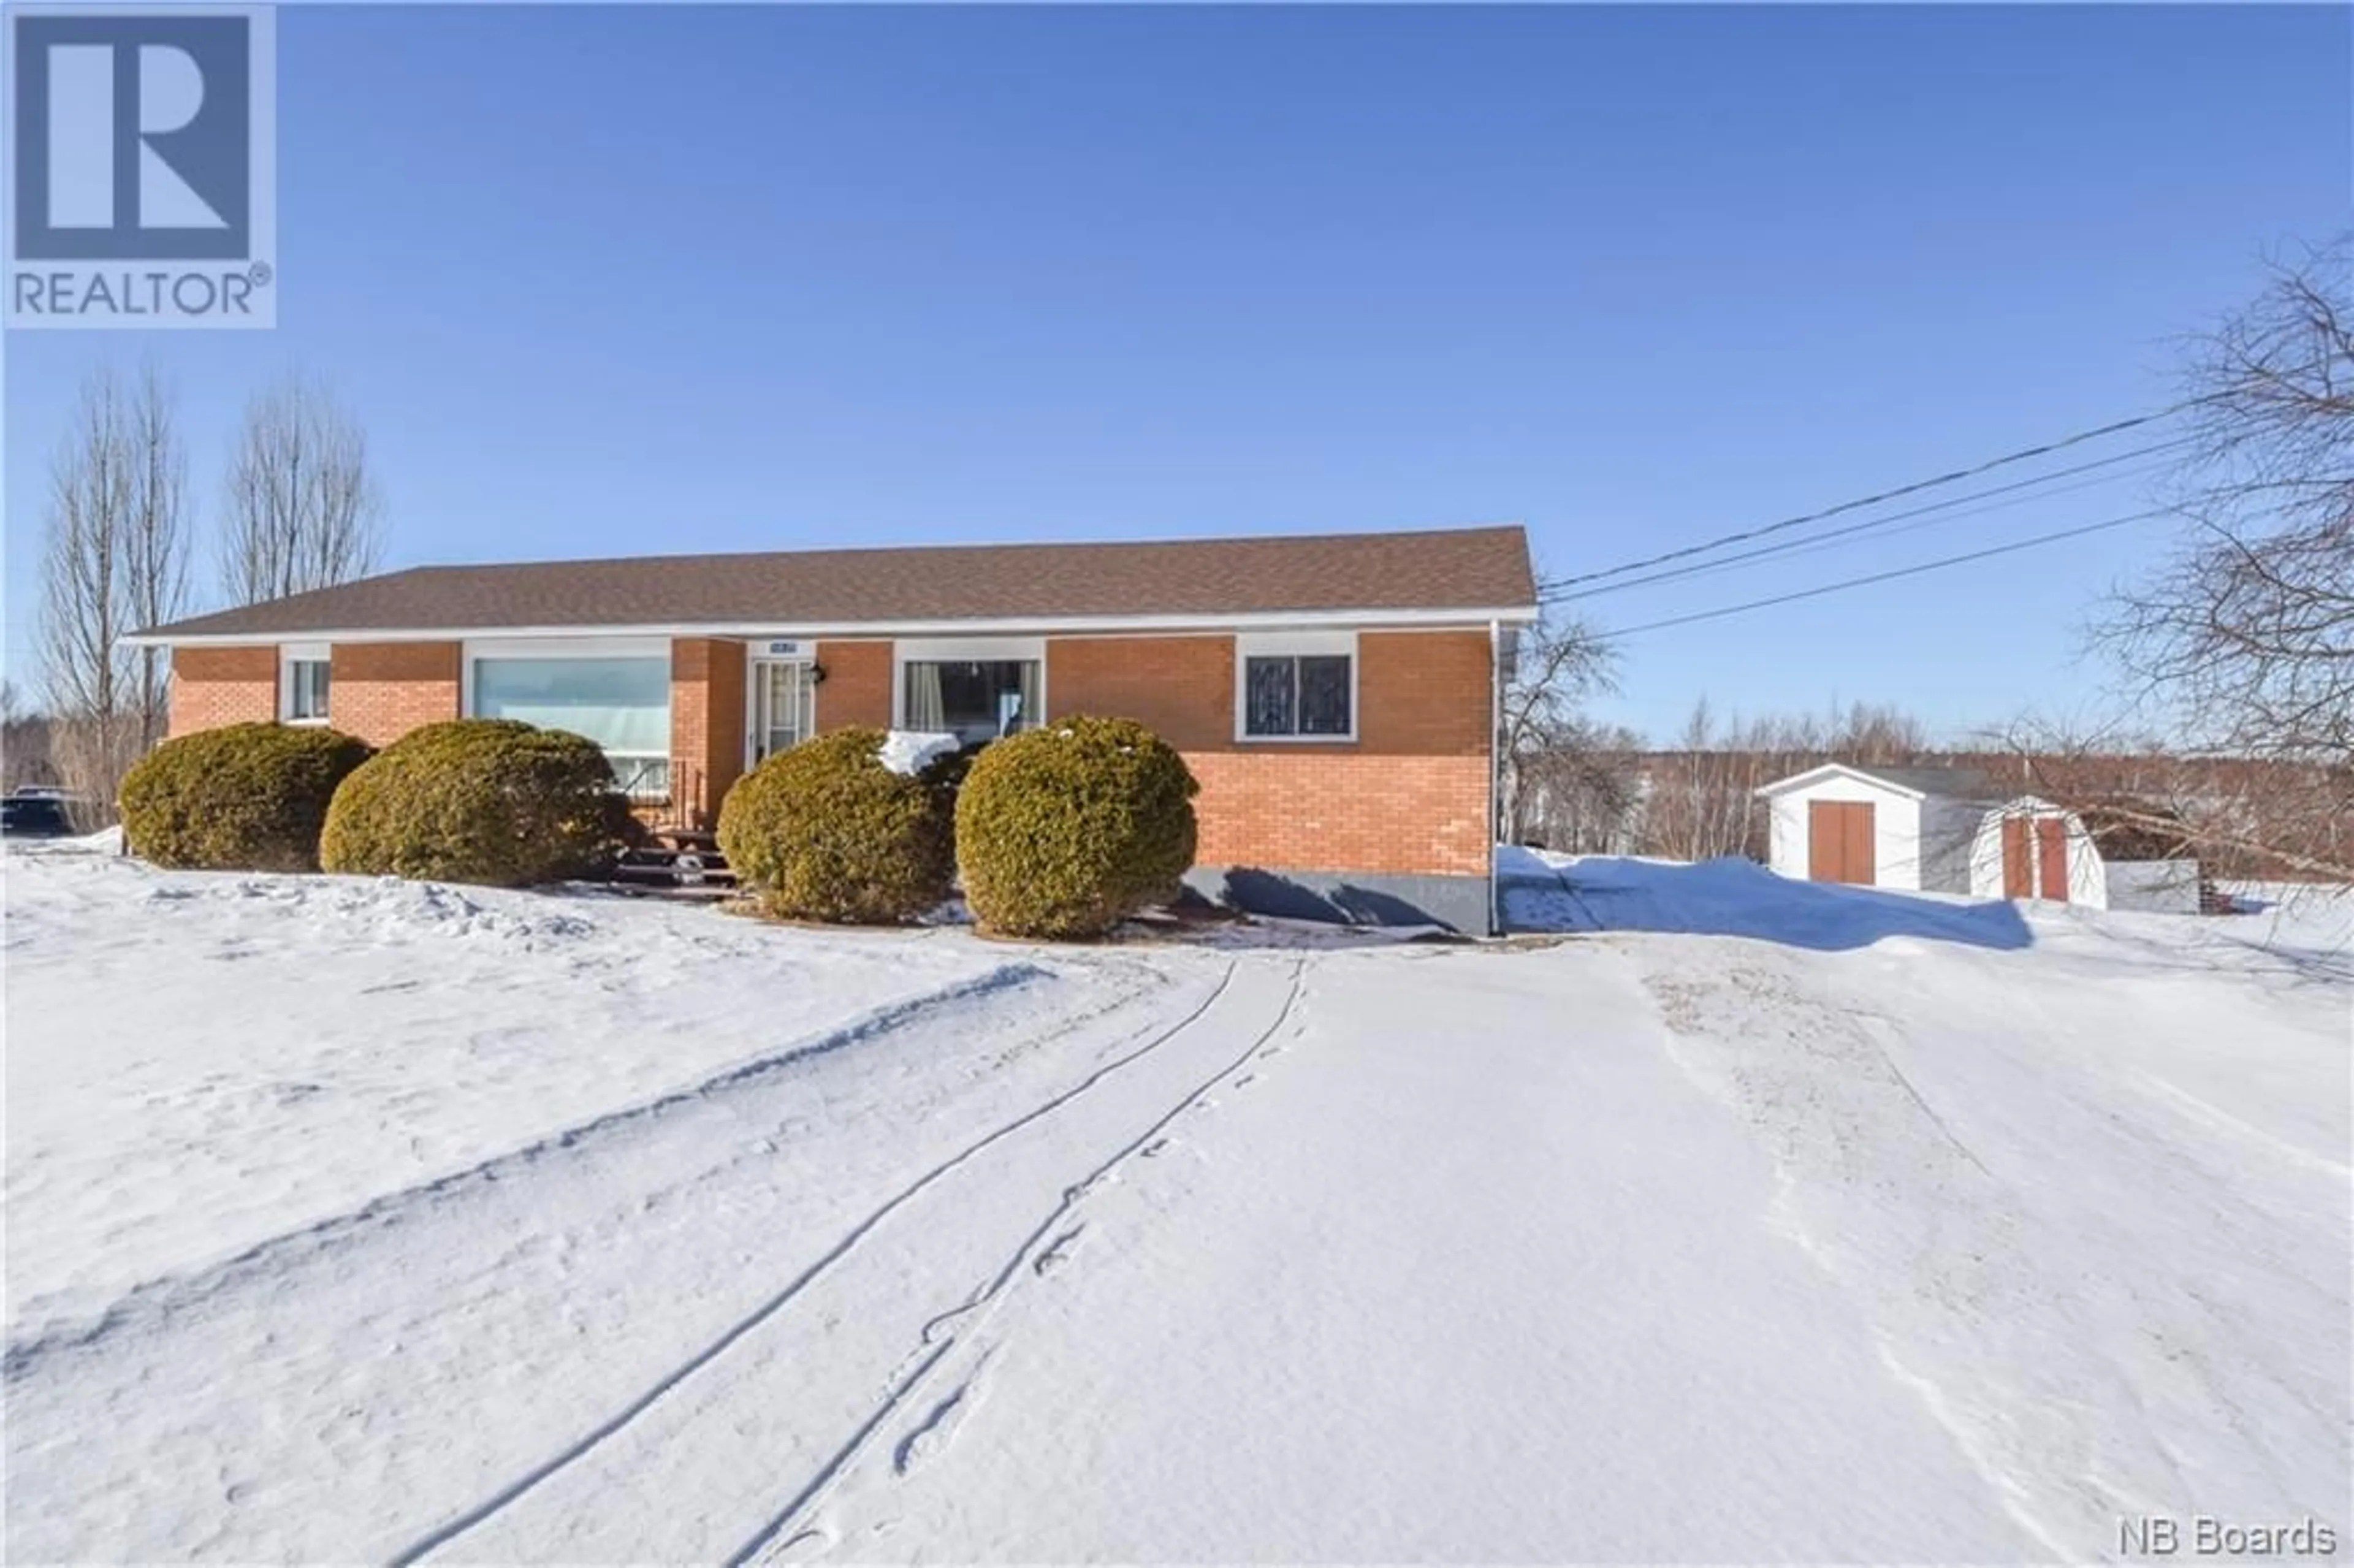 Home with unknown exterior material for 5825 Route 11, Rivière-Du-Portage New Brunswick E9H1W7